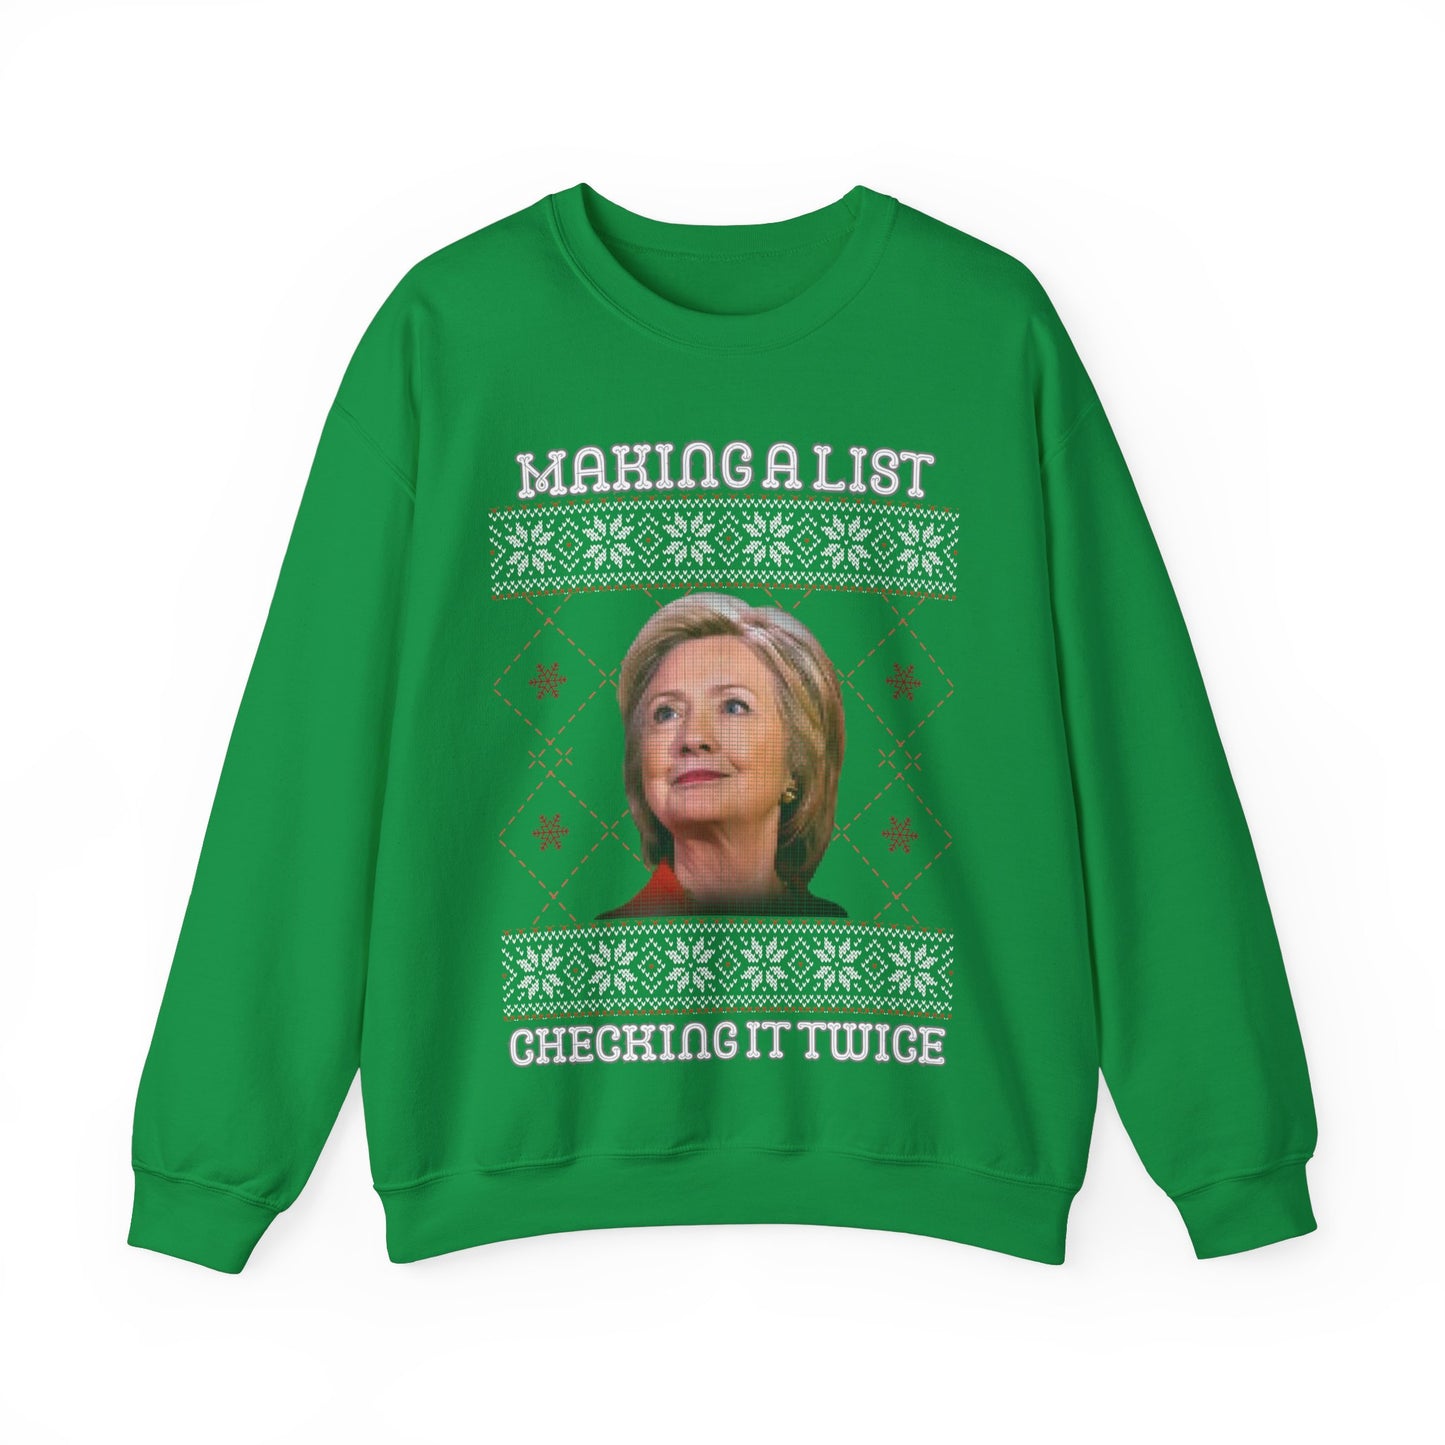 "Making a List" Hillary Clinton UGLY Christmas Sweater